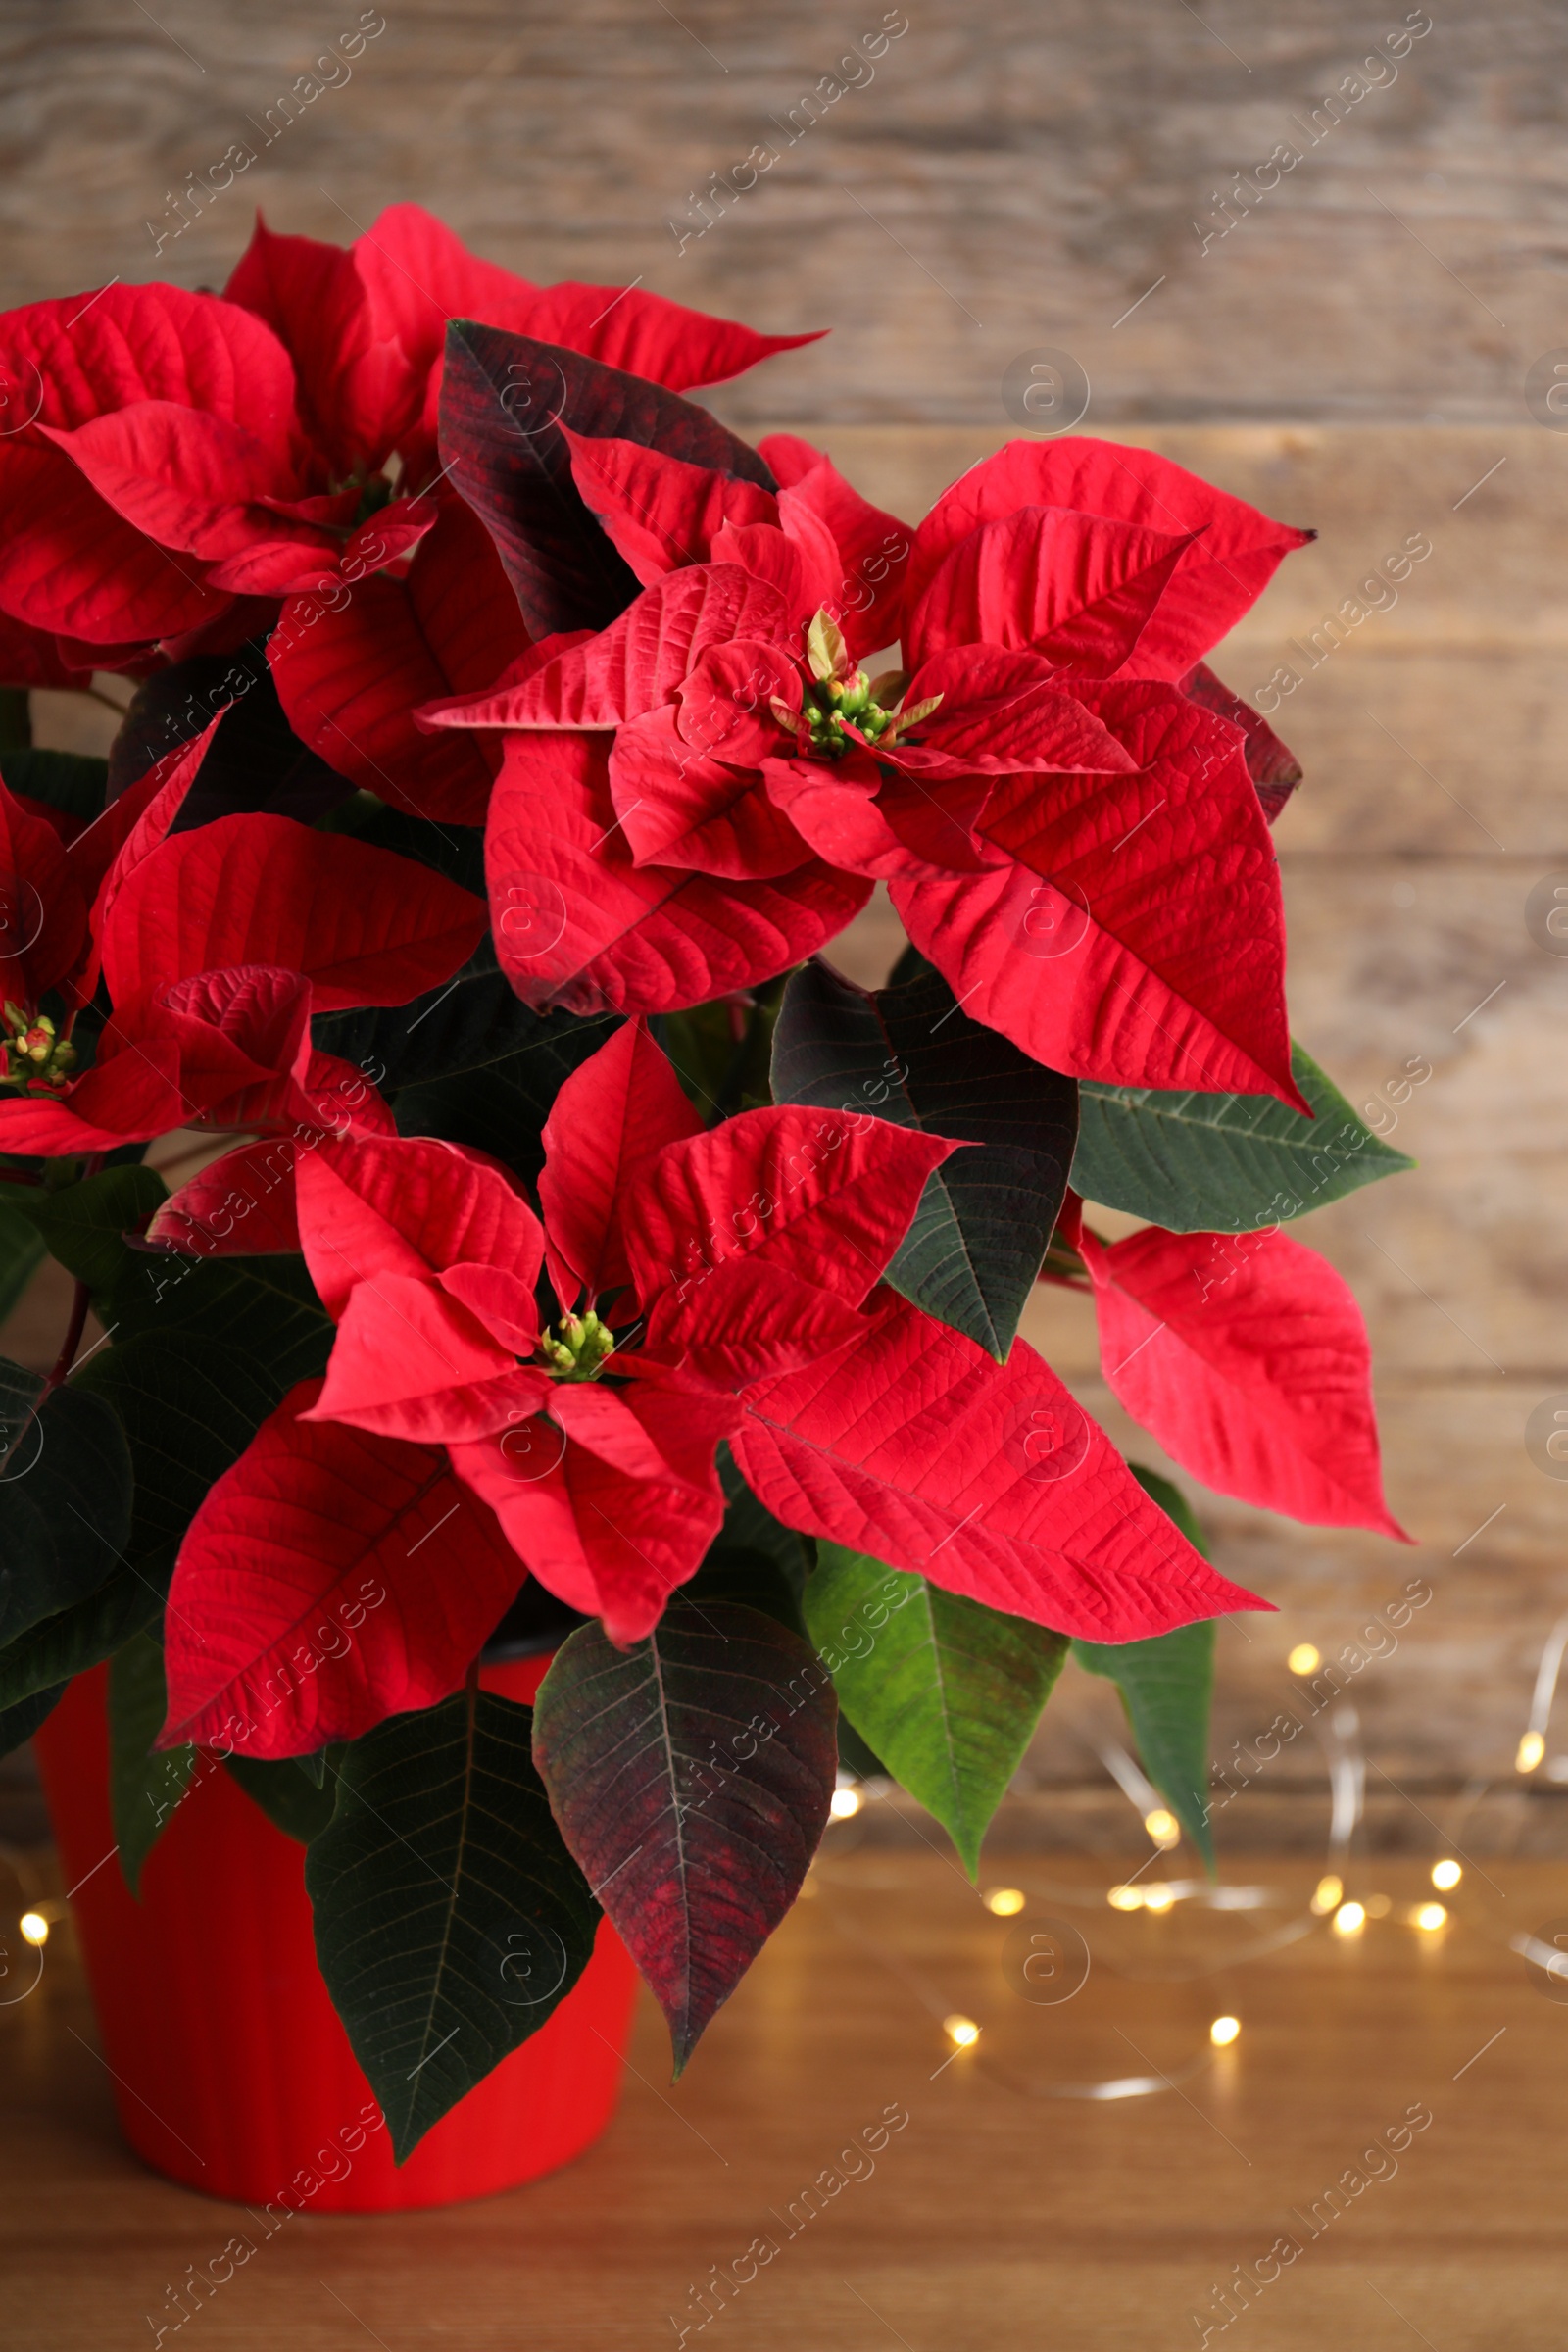 Photo of Poinsettia (traditional Christmas flower) and string lights on wooden table